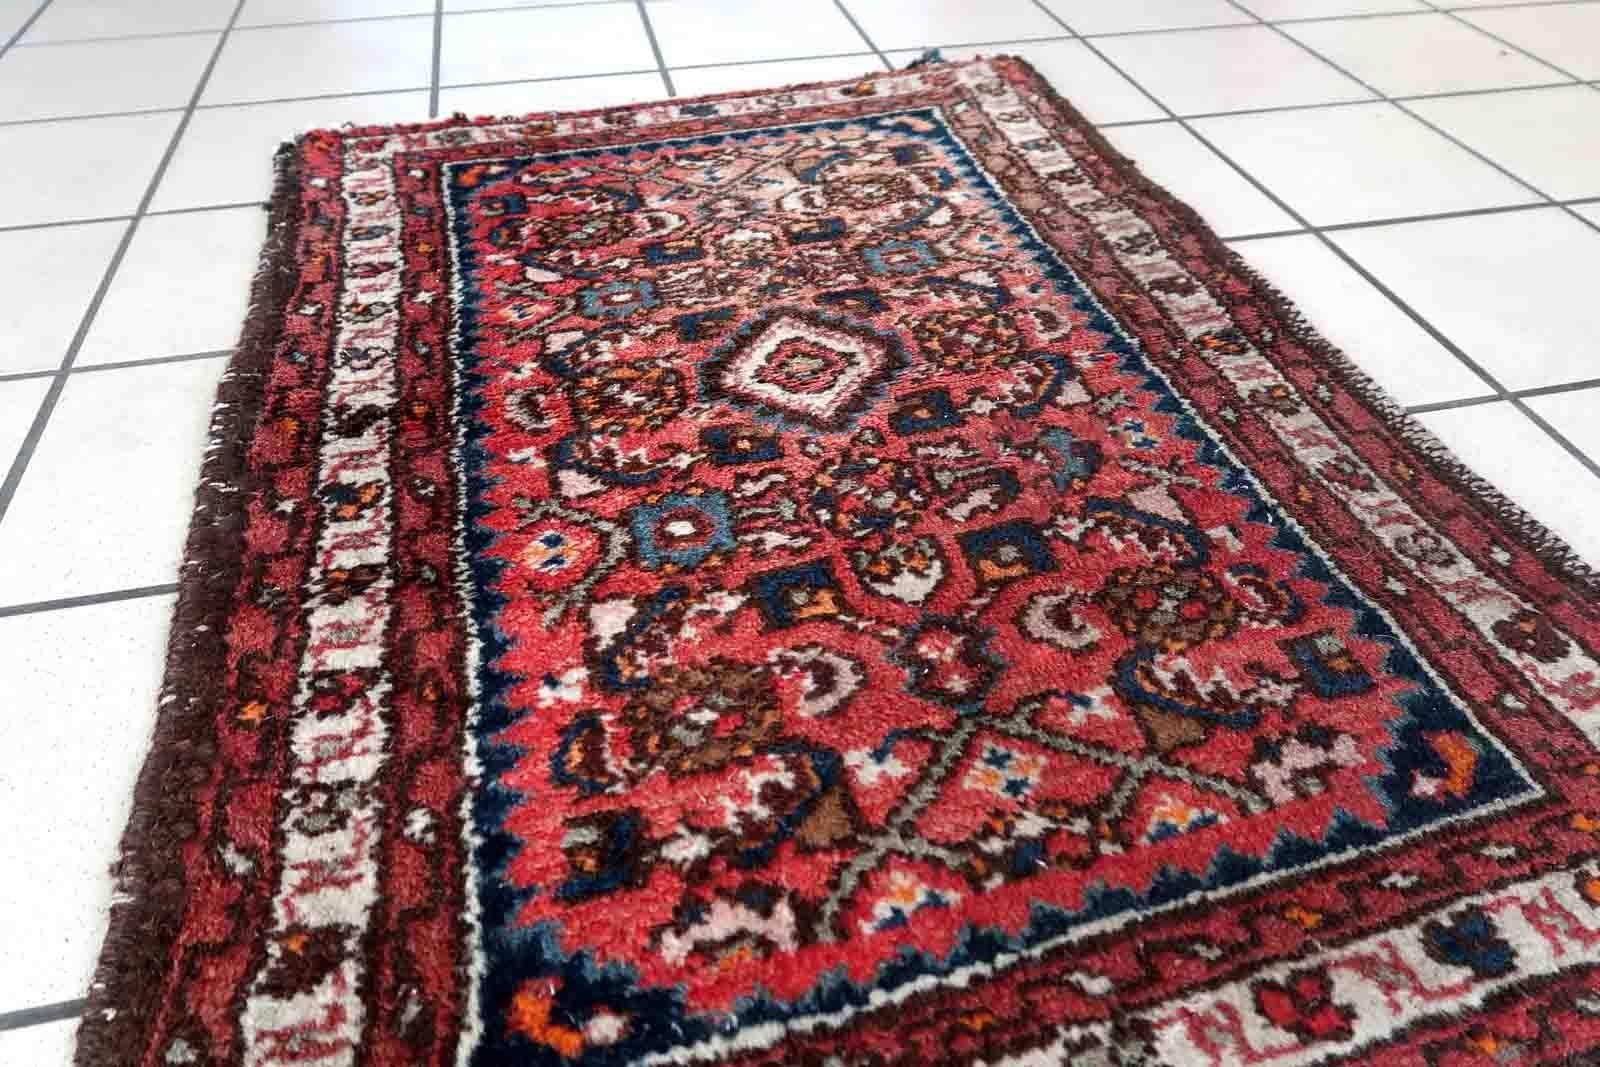 Handmade vintage Hamadan rug with medallion design. The rug is in original good condition from the end of 20th century.

-condition: original, some signs of age,

-circa: 1970s,

-size: 2' x 2.8' (62cm x 86cm),

-material: wool,

-country of origin: